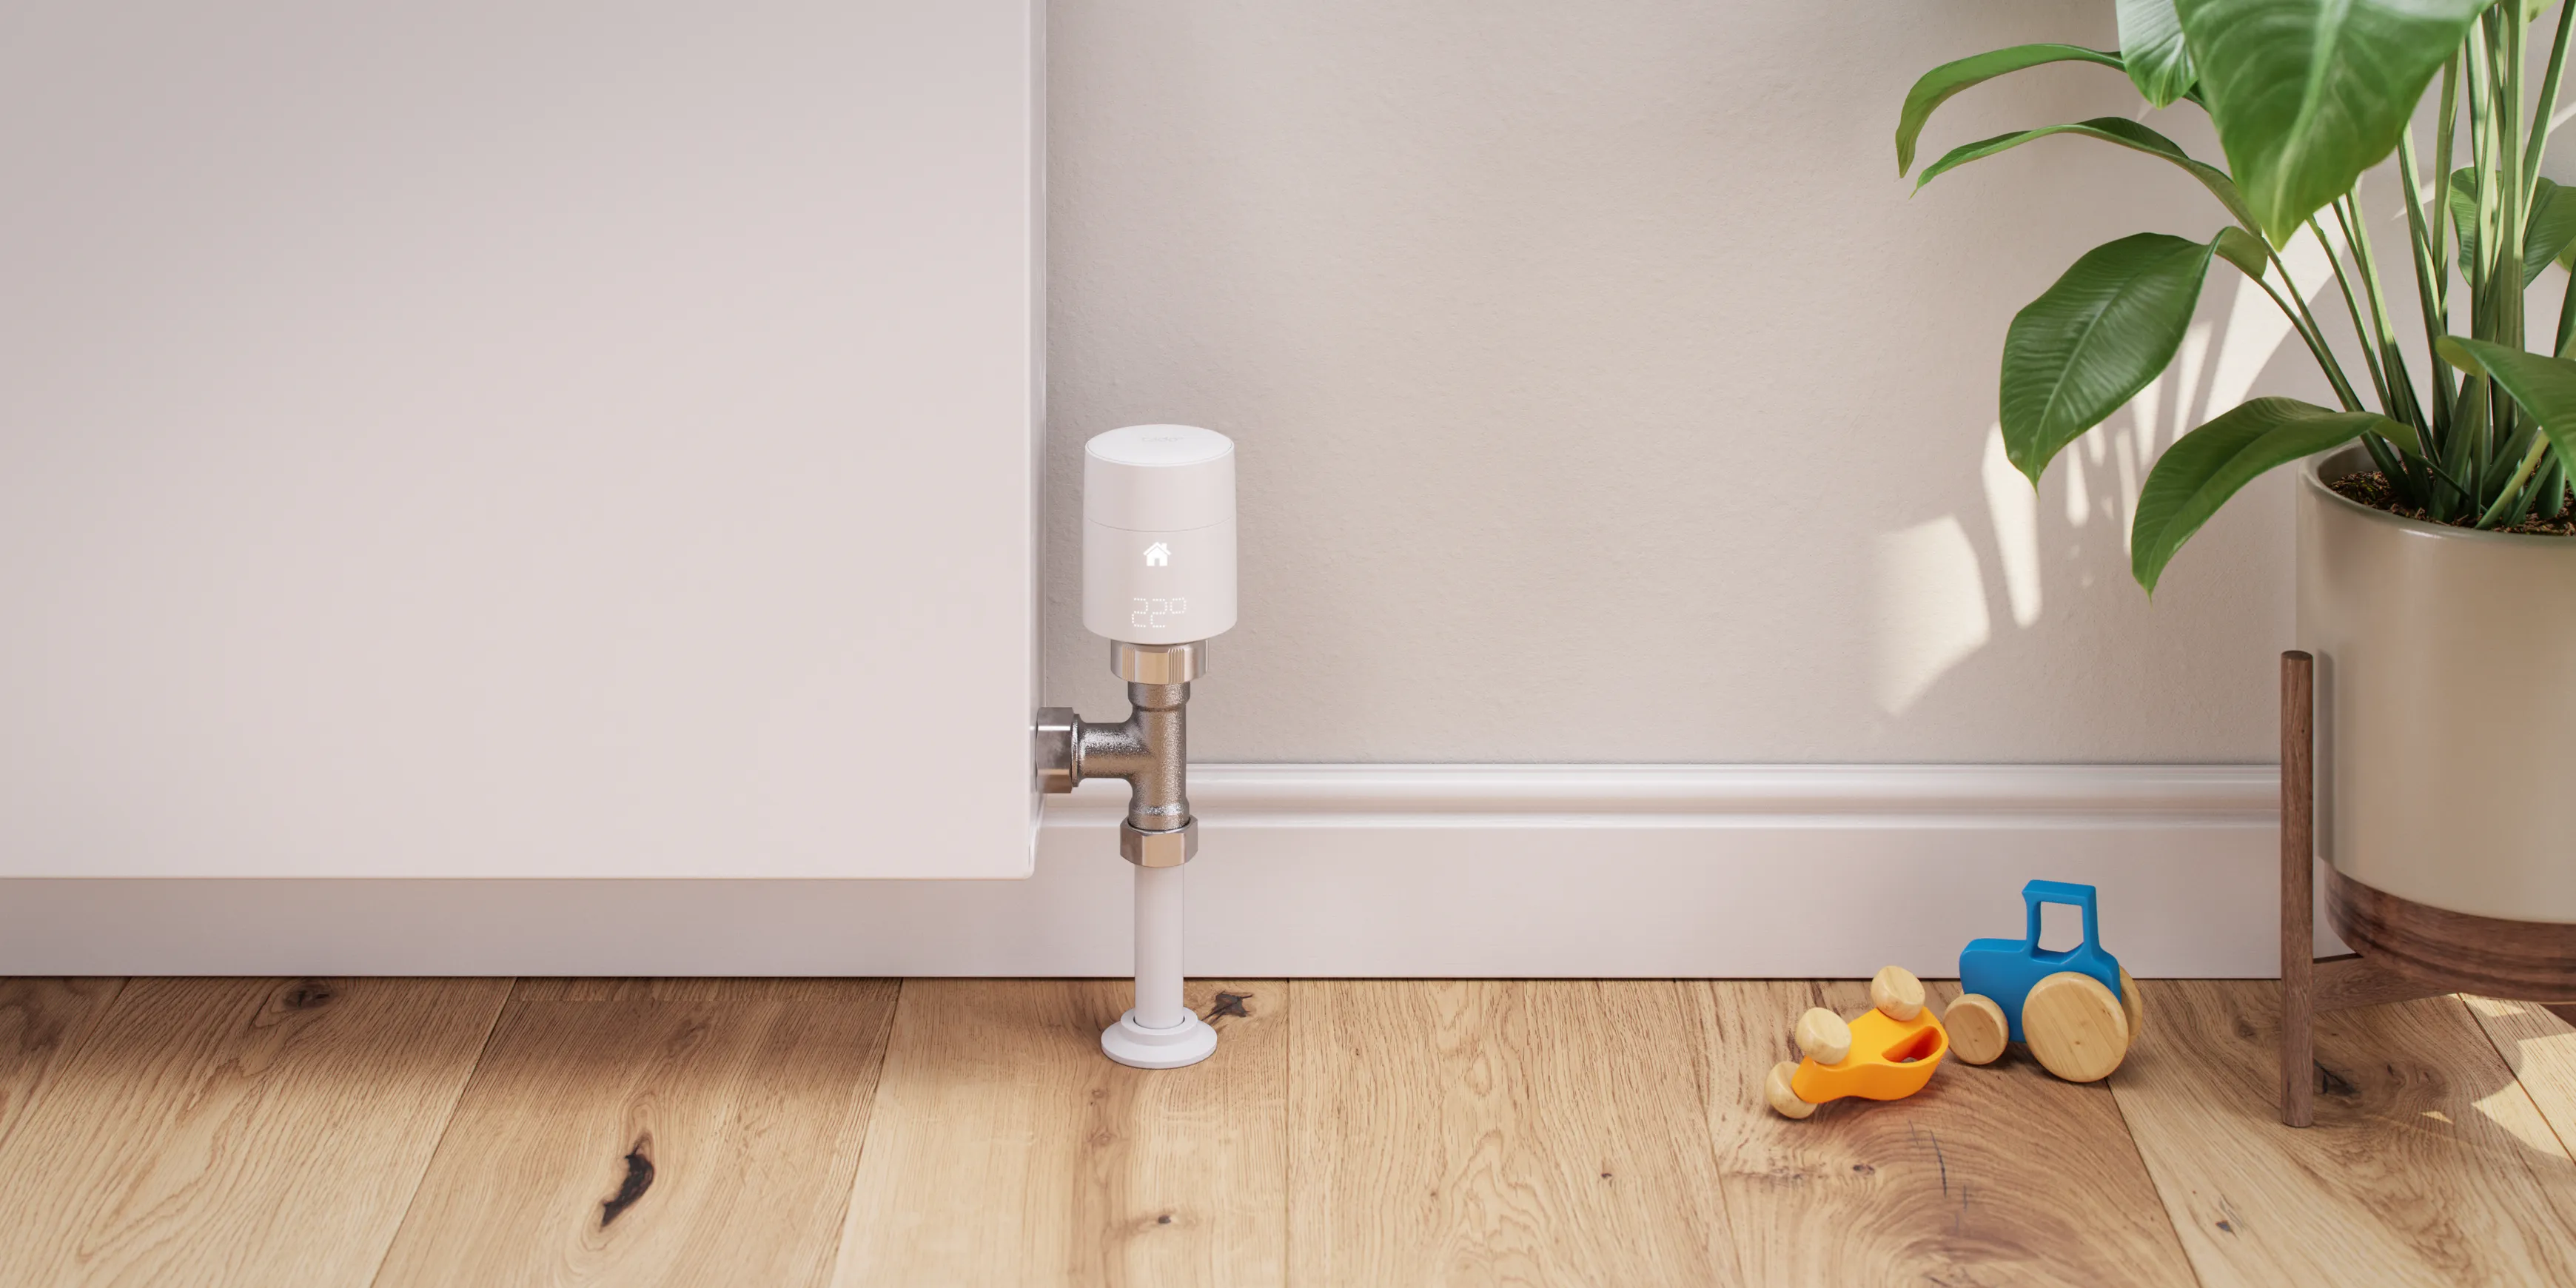 A tado smart heating radiator thermostat mounted on a radiator next to a potted plant and toys